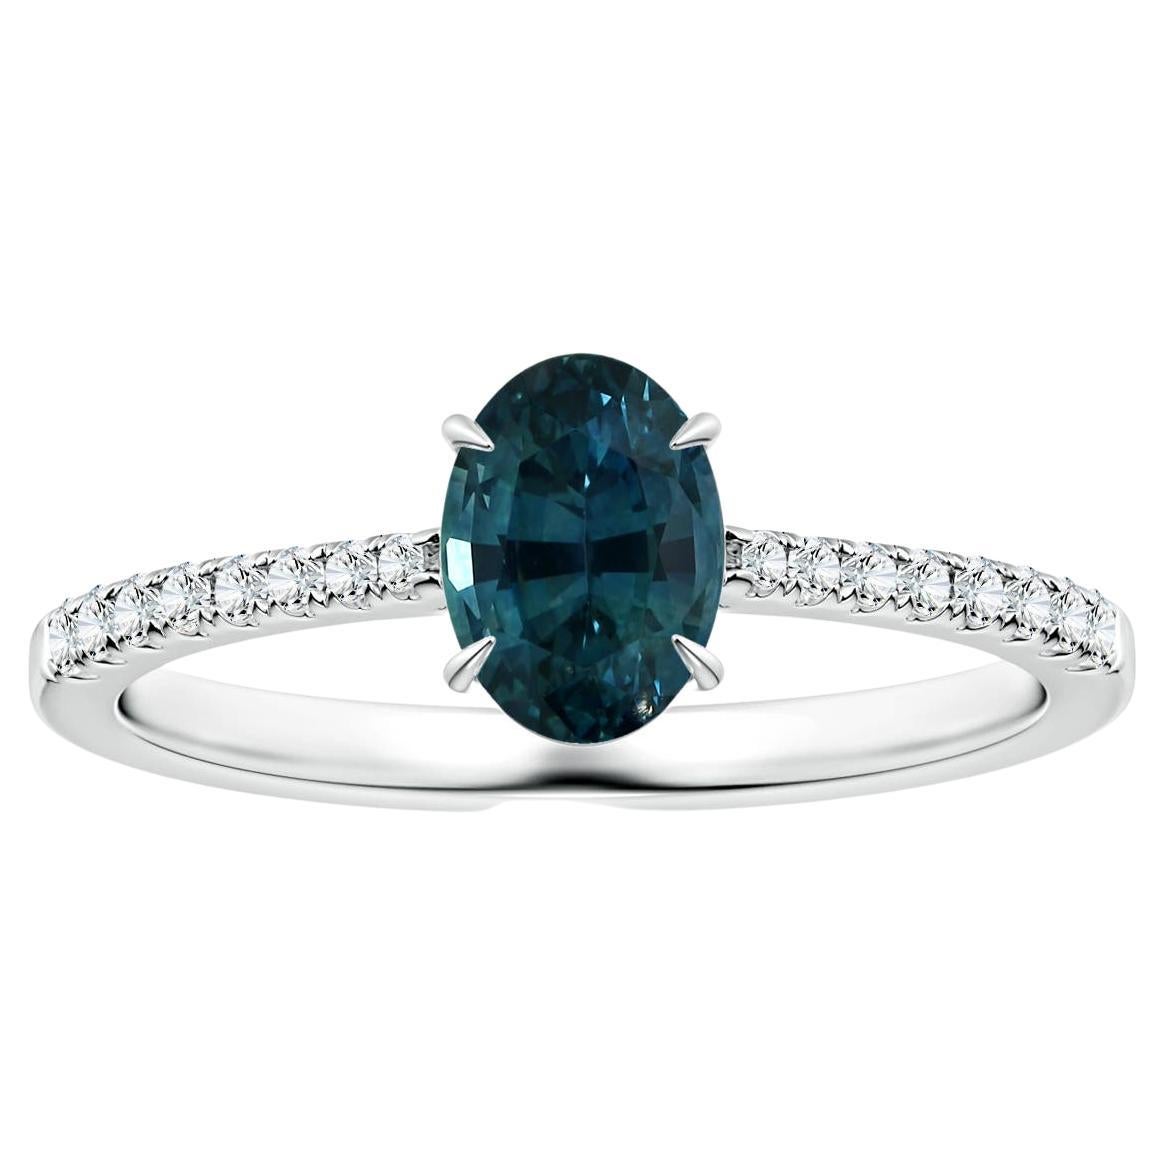 ANGARA GIA Certified Teal Sapphire Ring in Platinum with Diamonds